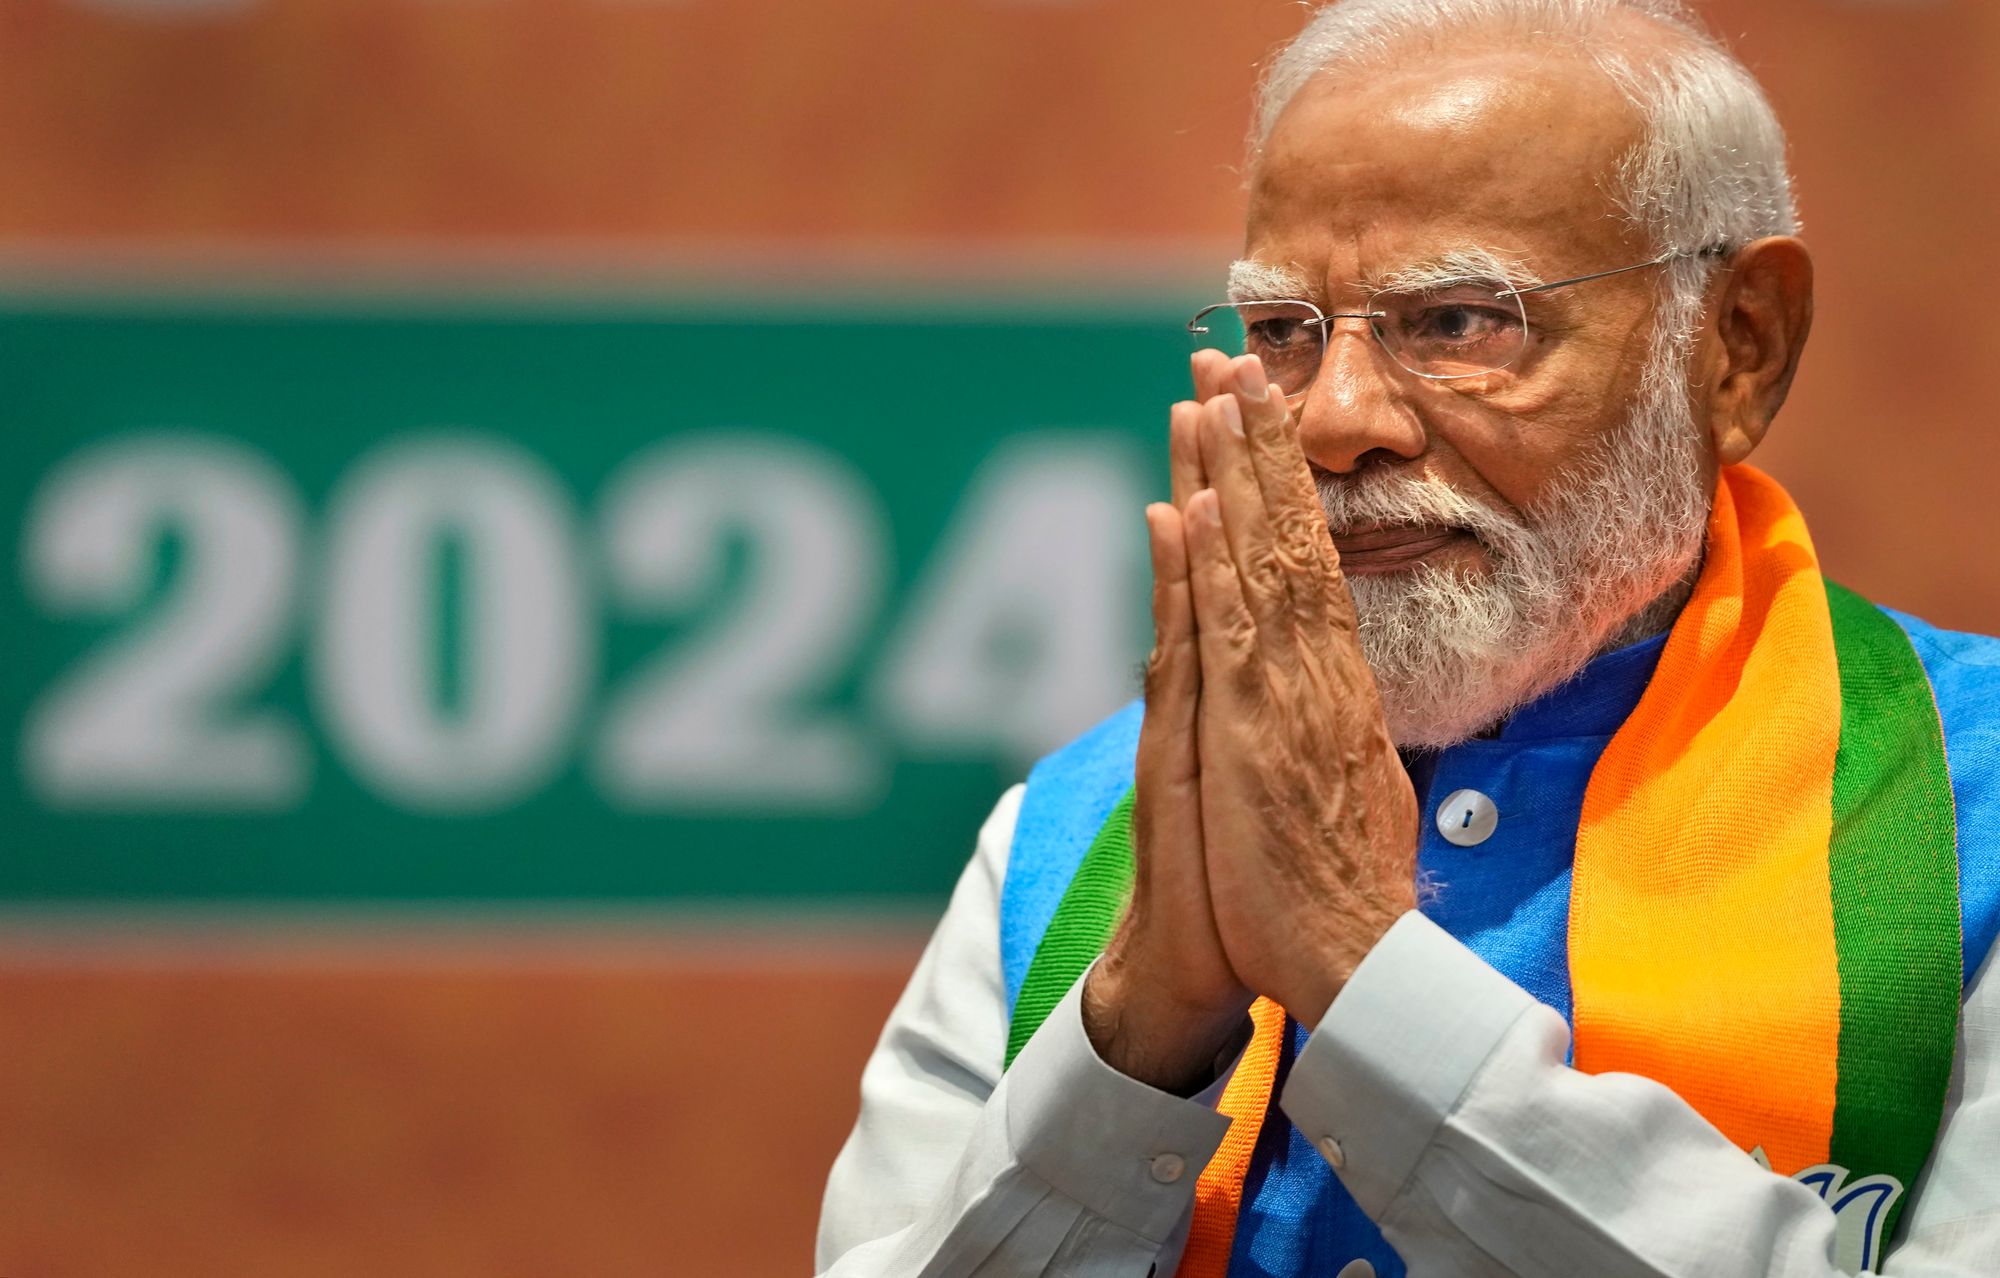 world’s largest election under way as india’s narendra modi seeks third term